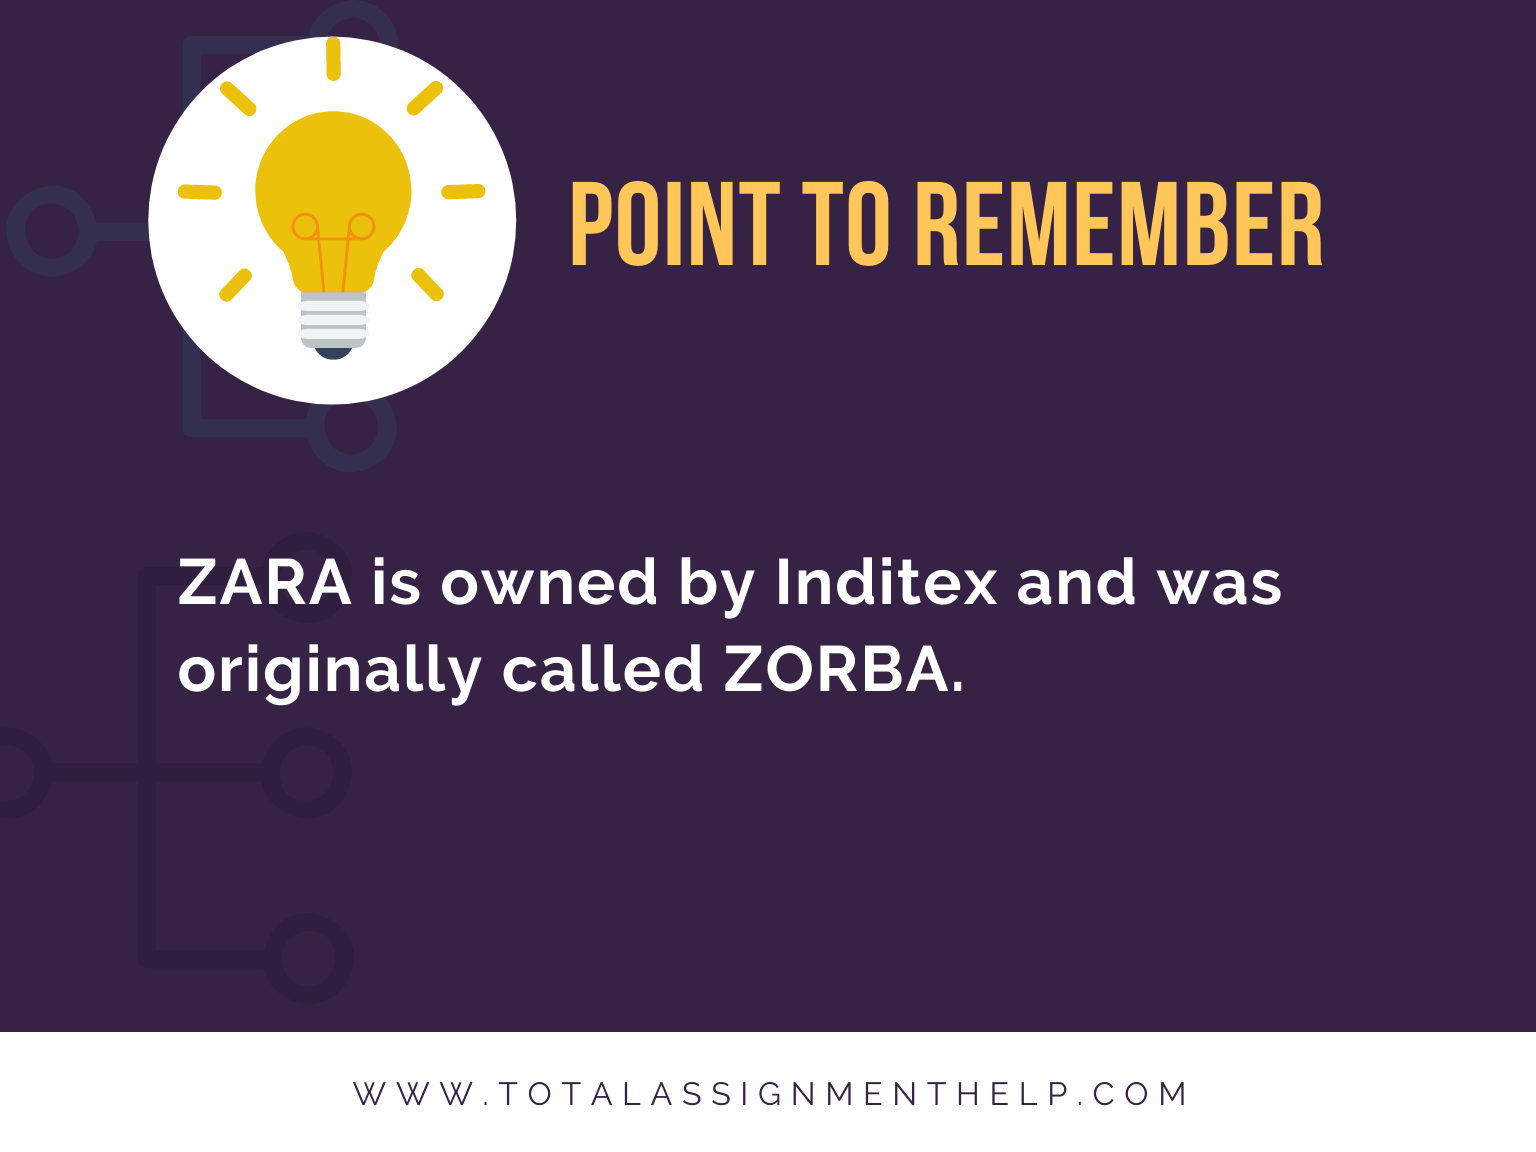 ZARA Case Study Solution - Total Assignment Help